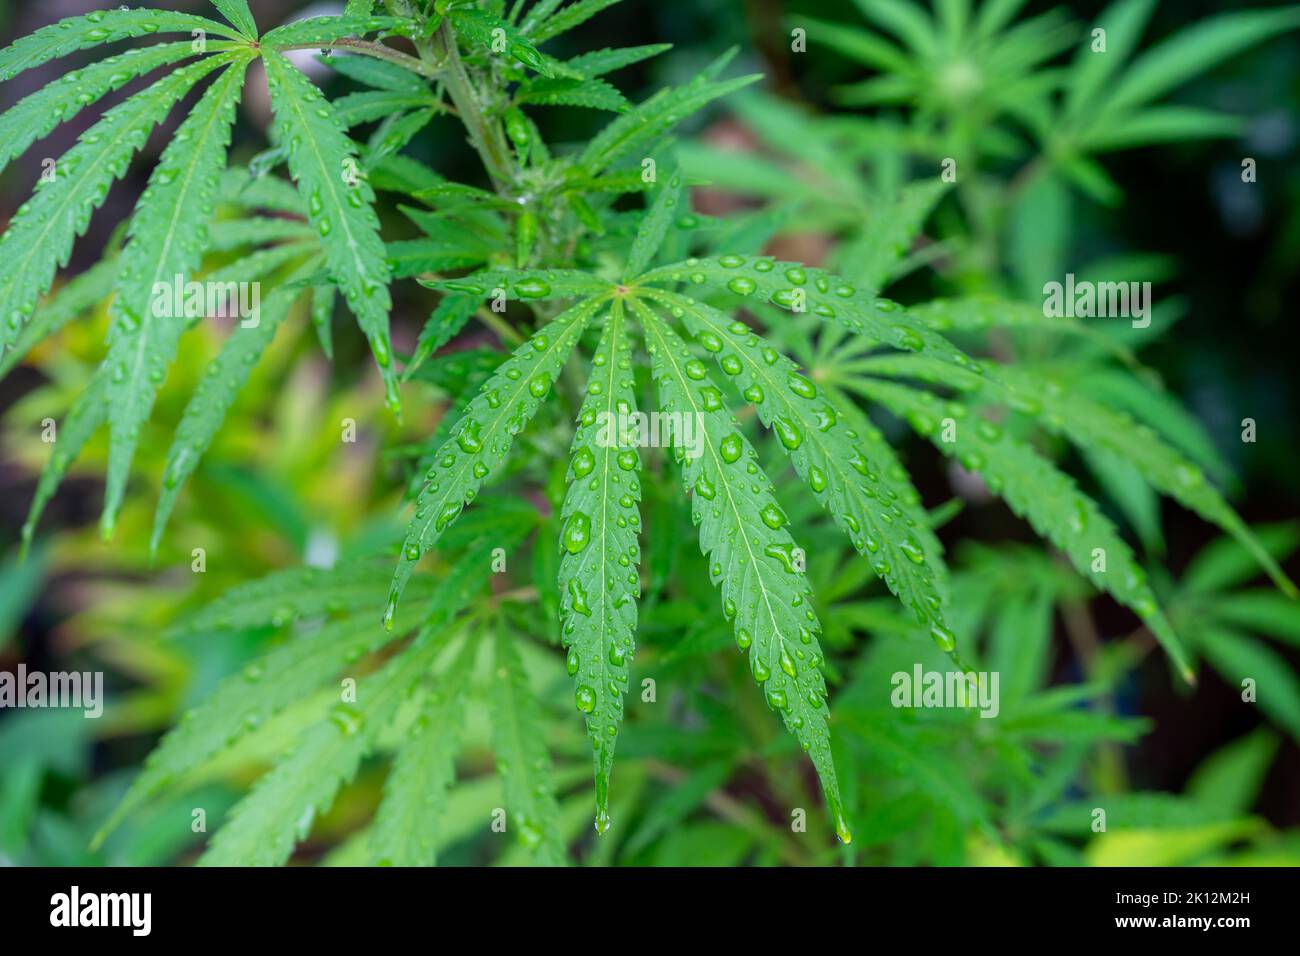 green cannabis plant with raindrops Stock Photo